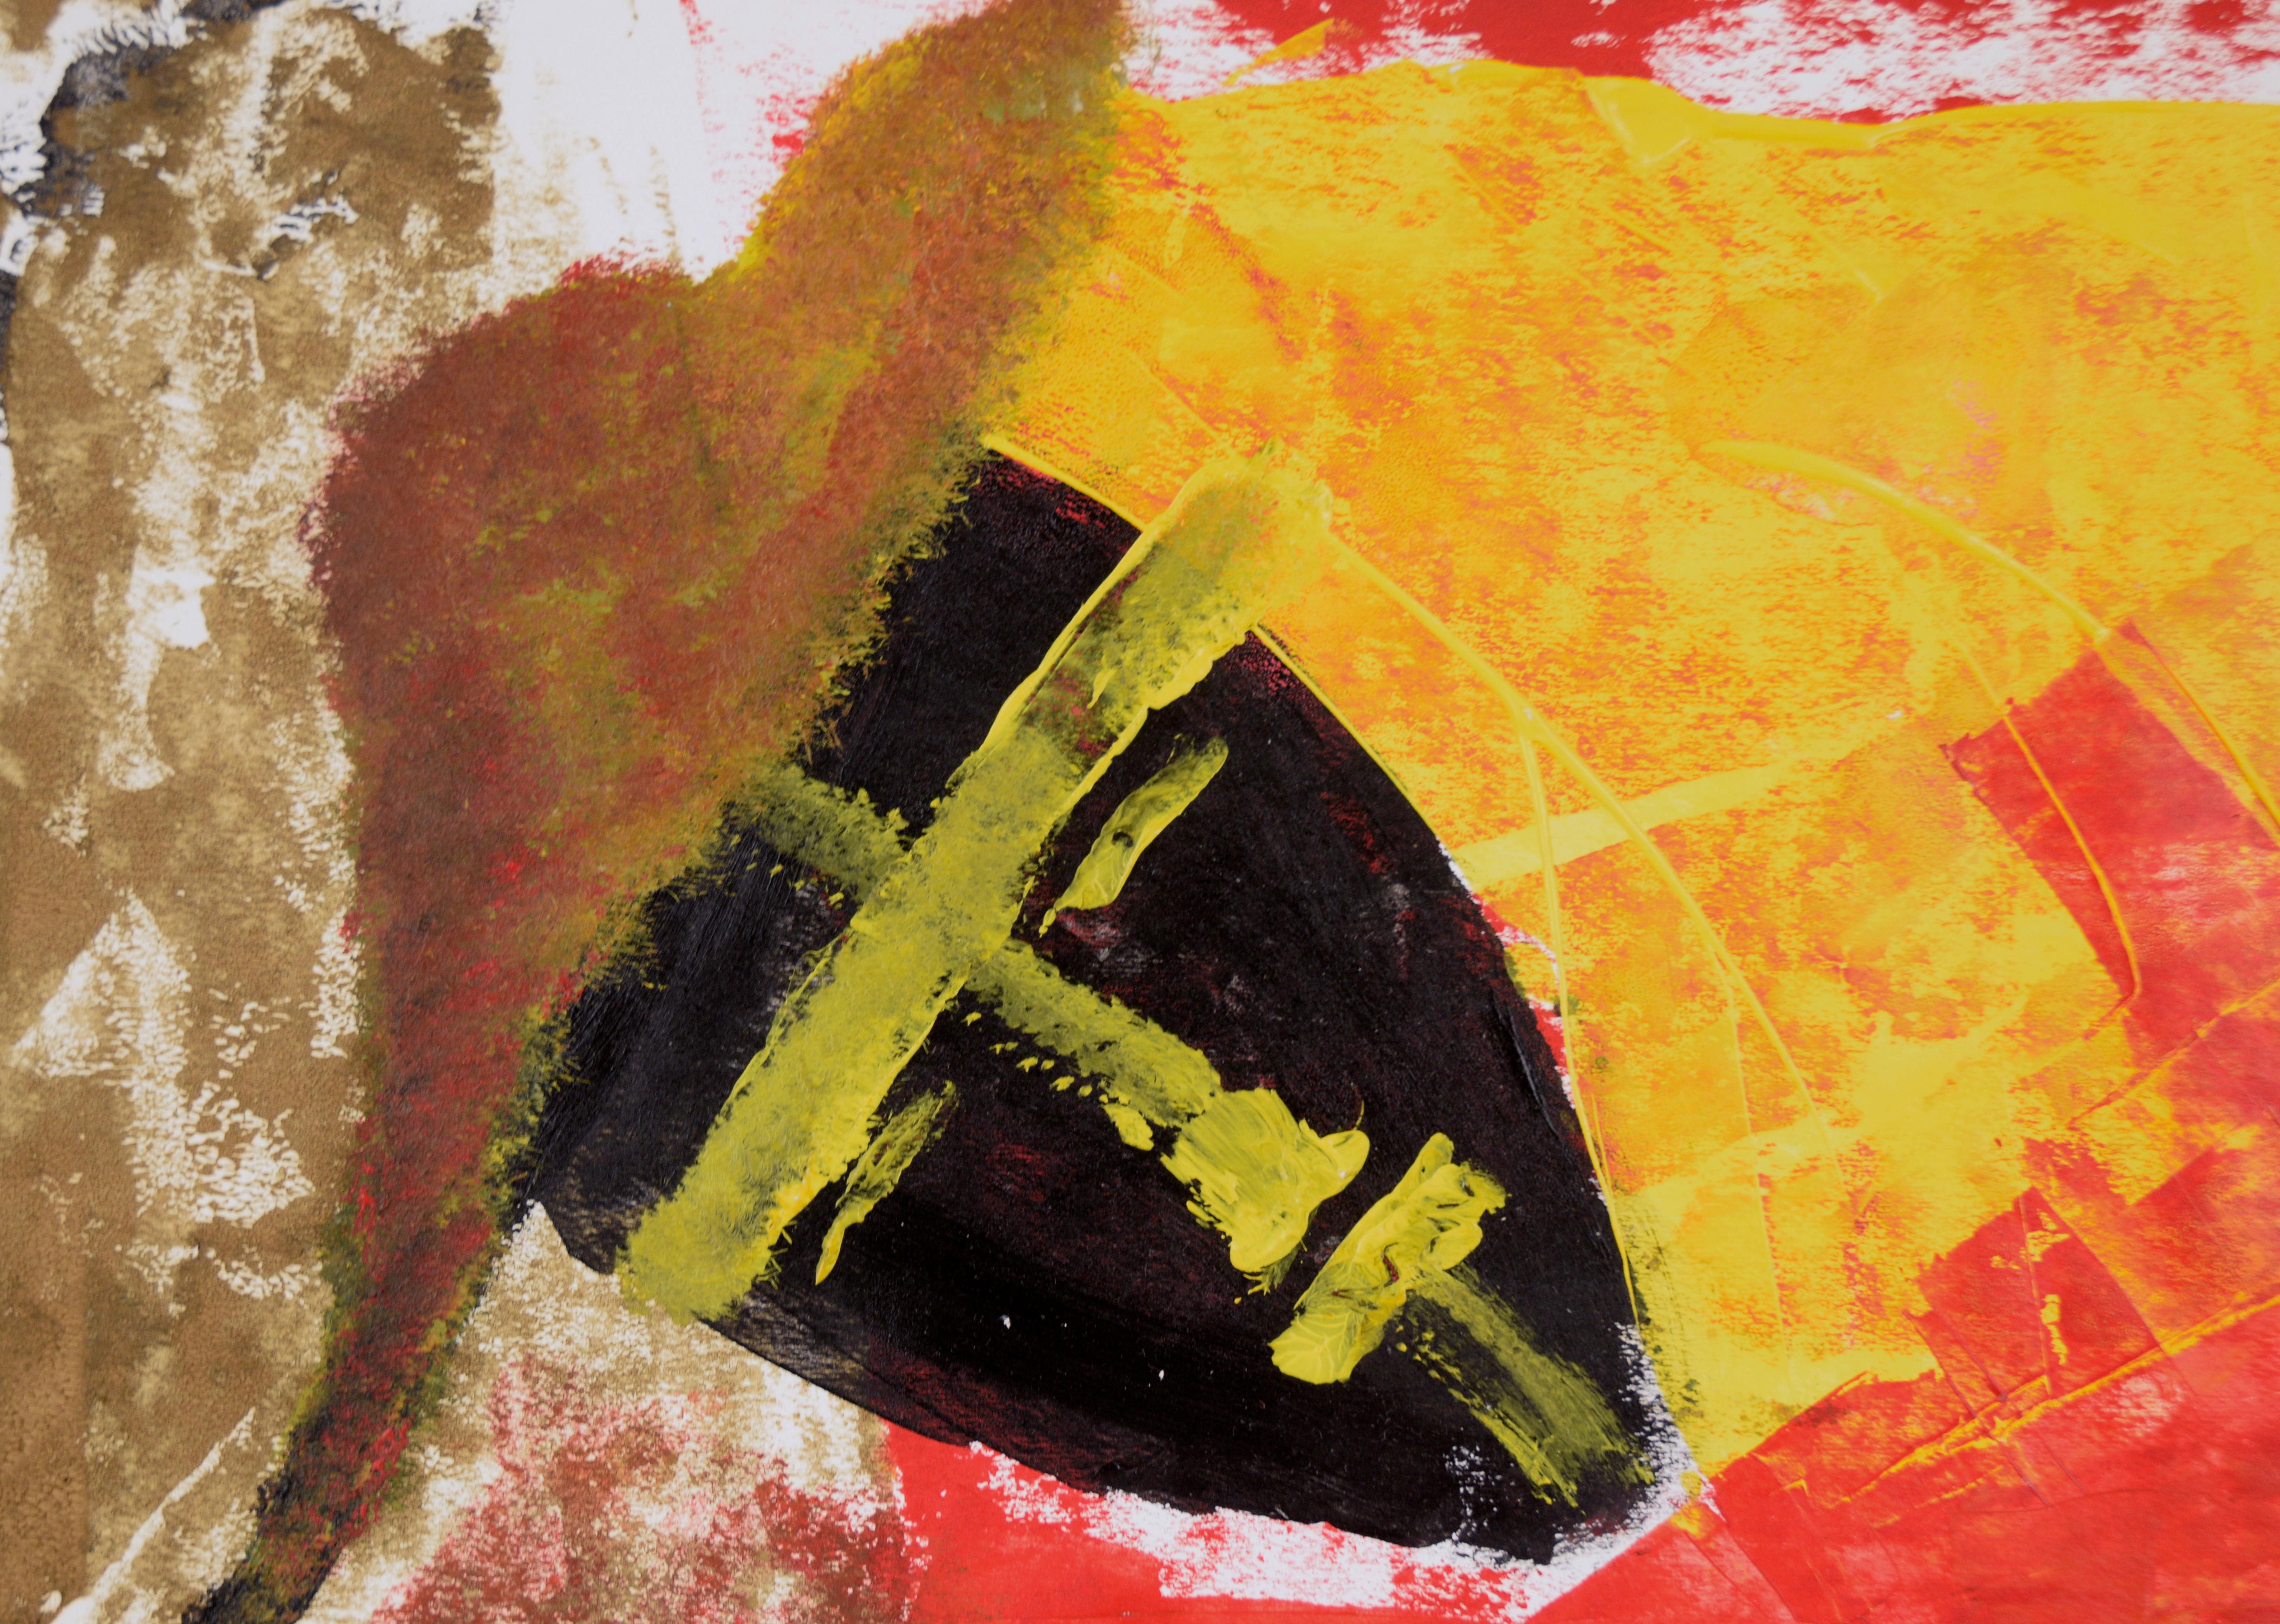 Sombrero in the Iron Mask - Geometric Abstract Expressionist in Acrylic on Paper

A bold abstract painting in red, yellow and metallic gold, depicting a black mask figure in a hat, by California-based artist, Ricardo de Silva (American/Brazil, 20th